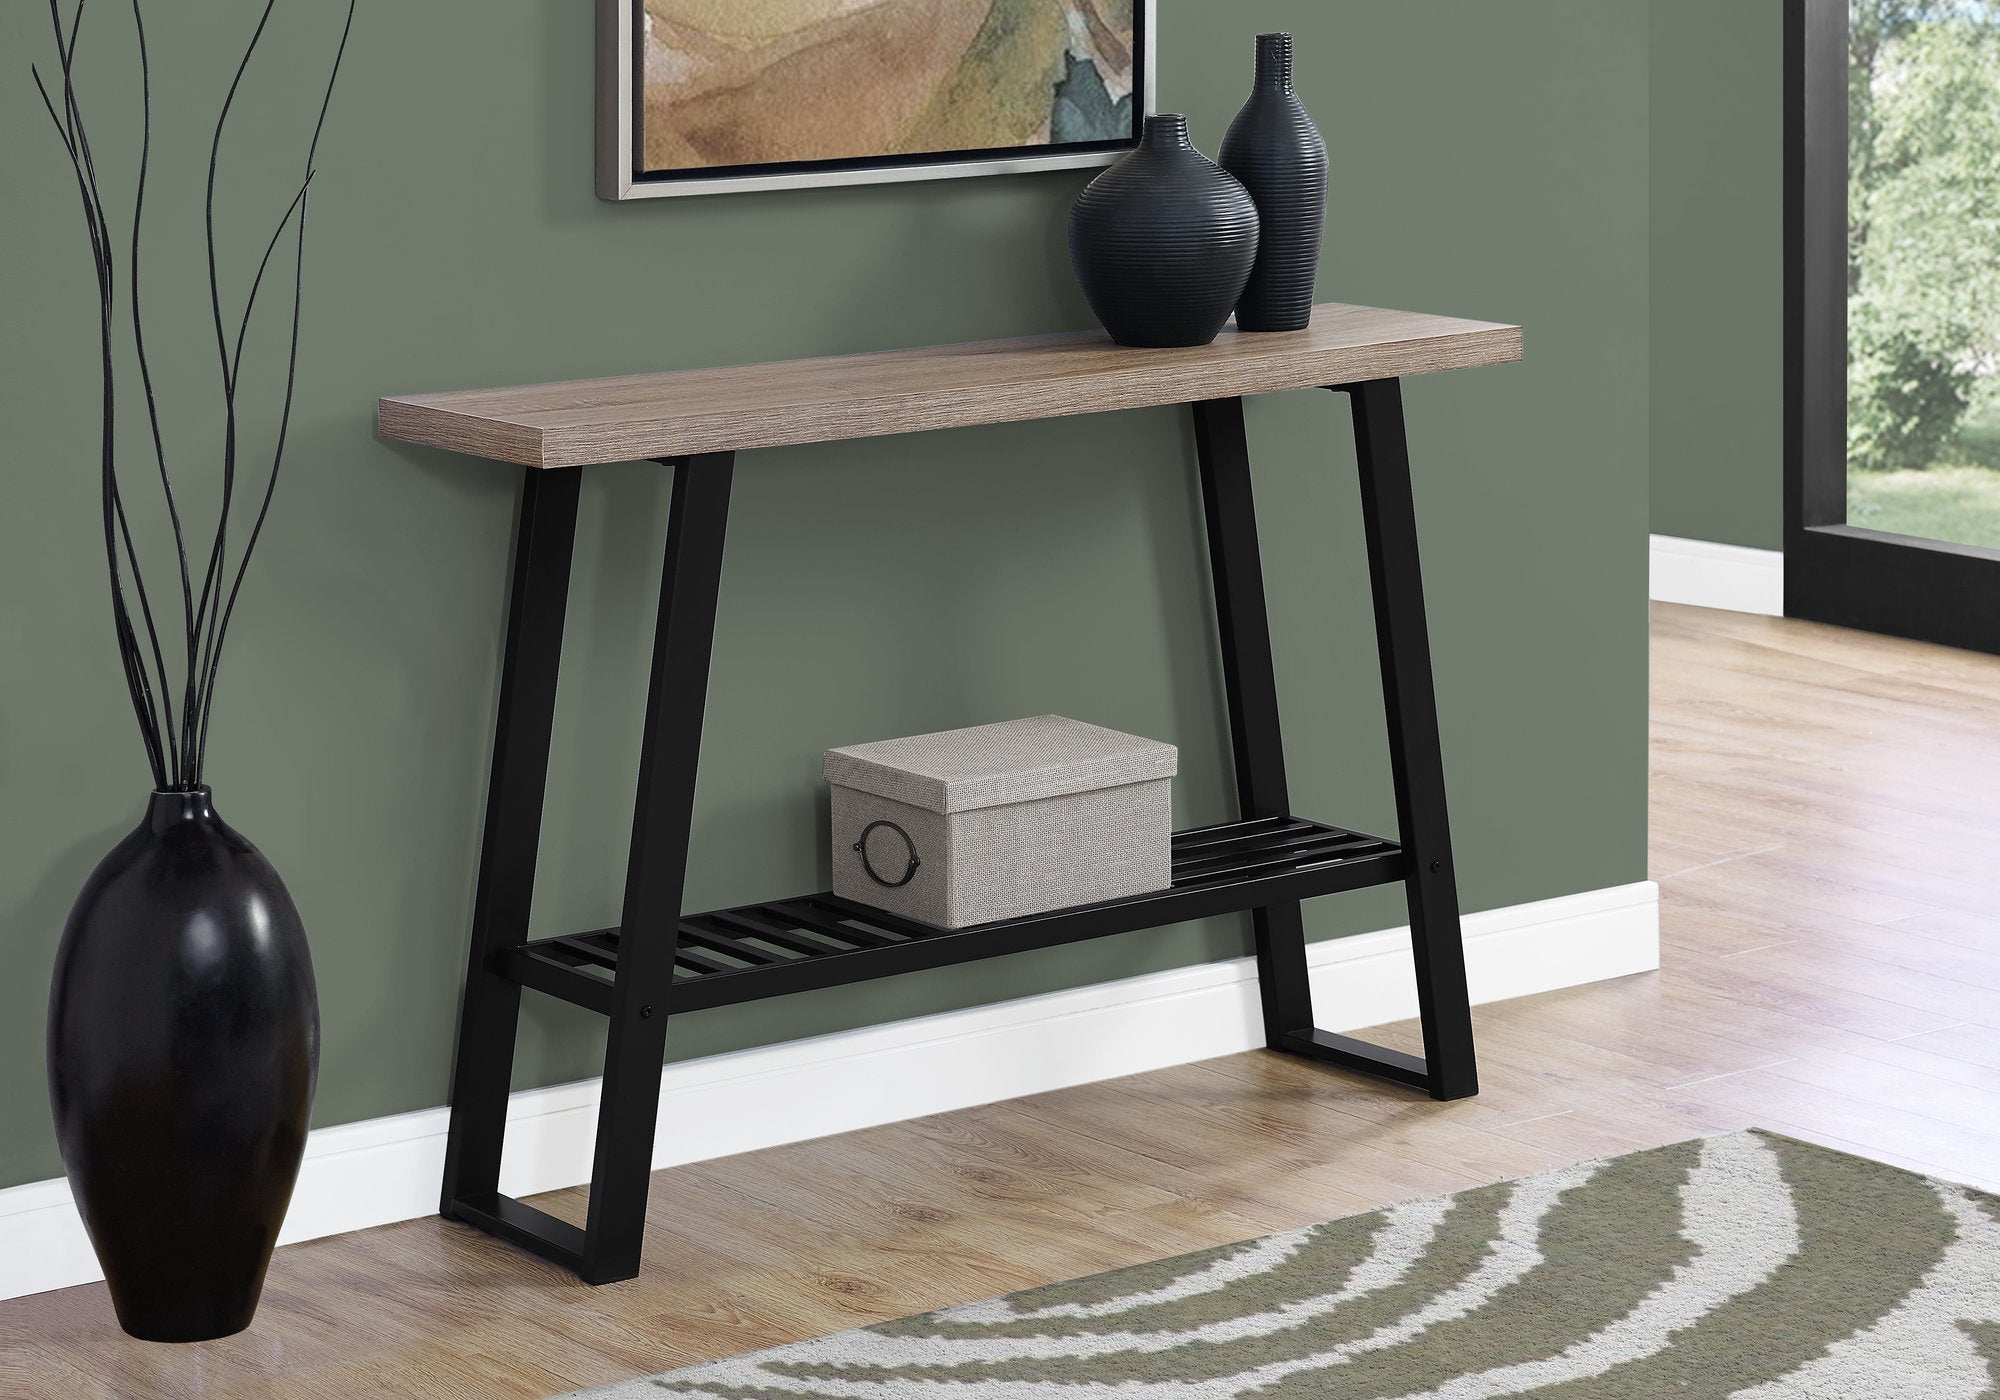 MN-112117    Accent Table, Console, Entryway, Narrow, Sofa, Living Room, Bedroom, Metal Legs, Laminate, Dark Taupe, Black, Contemporary, Modern